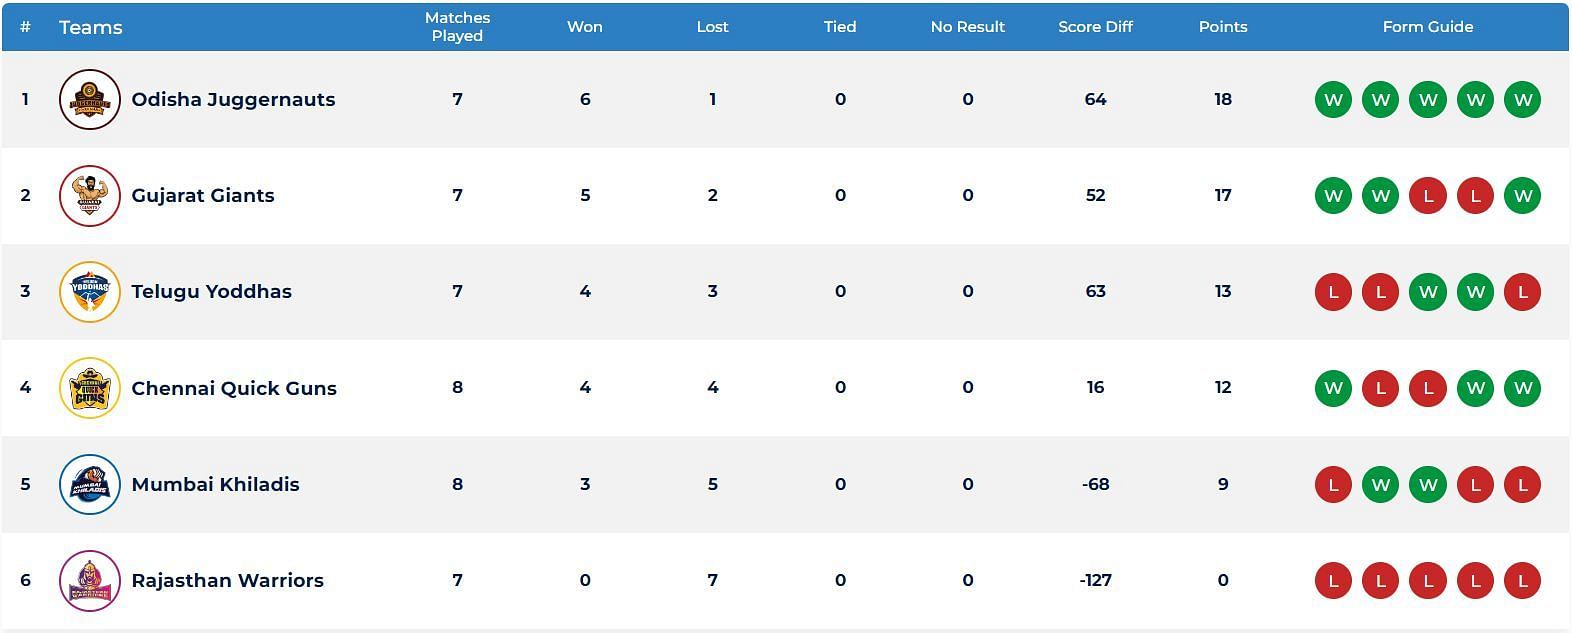 Rajasthan Warriors continue to languish at the bottom of the Ultimate Kho Kho 2022 points table (Image: UKK)